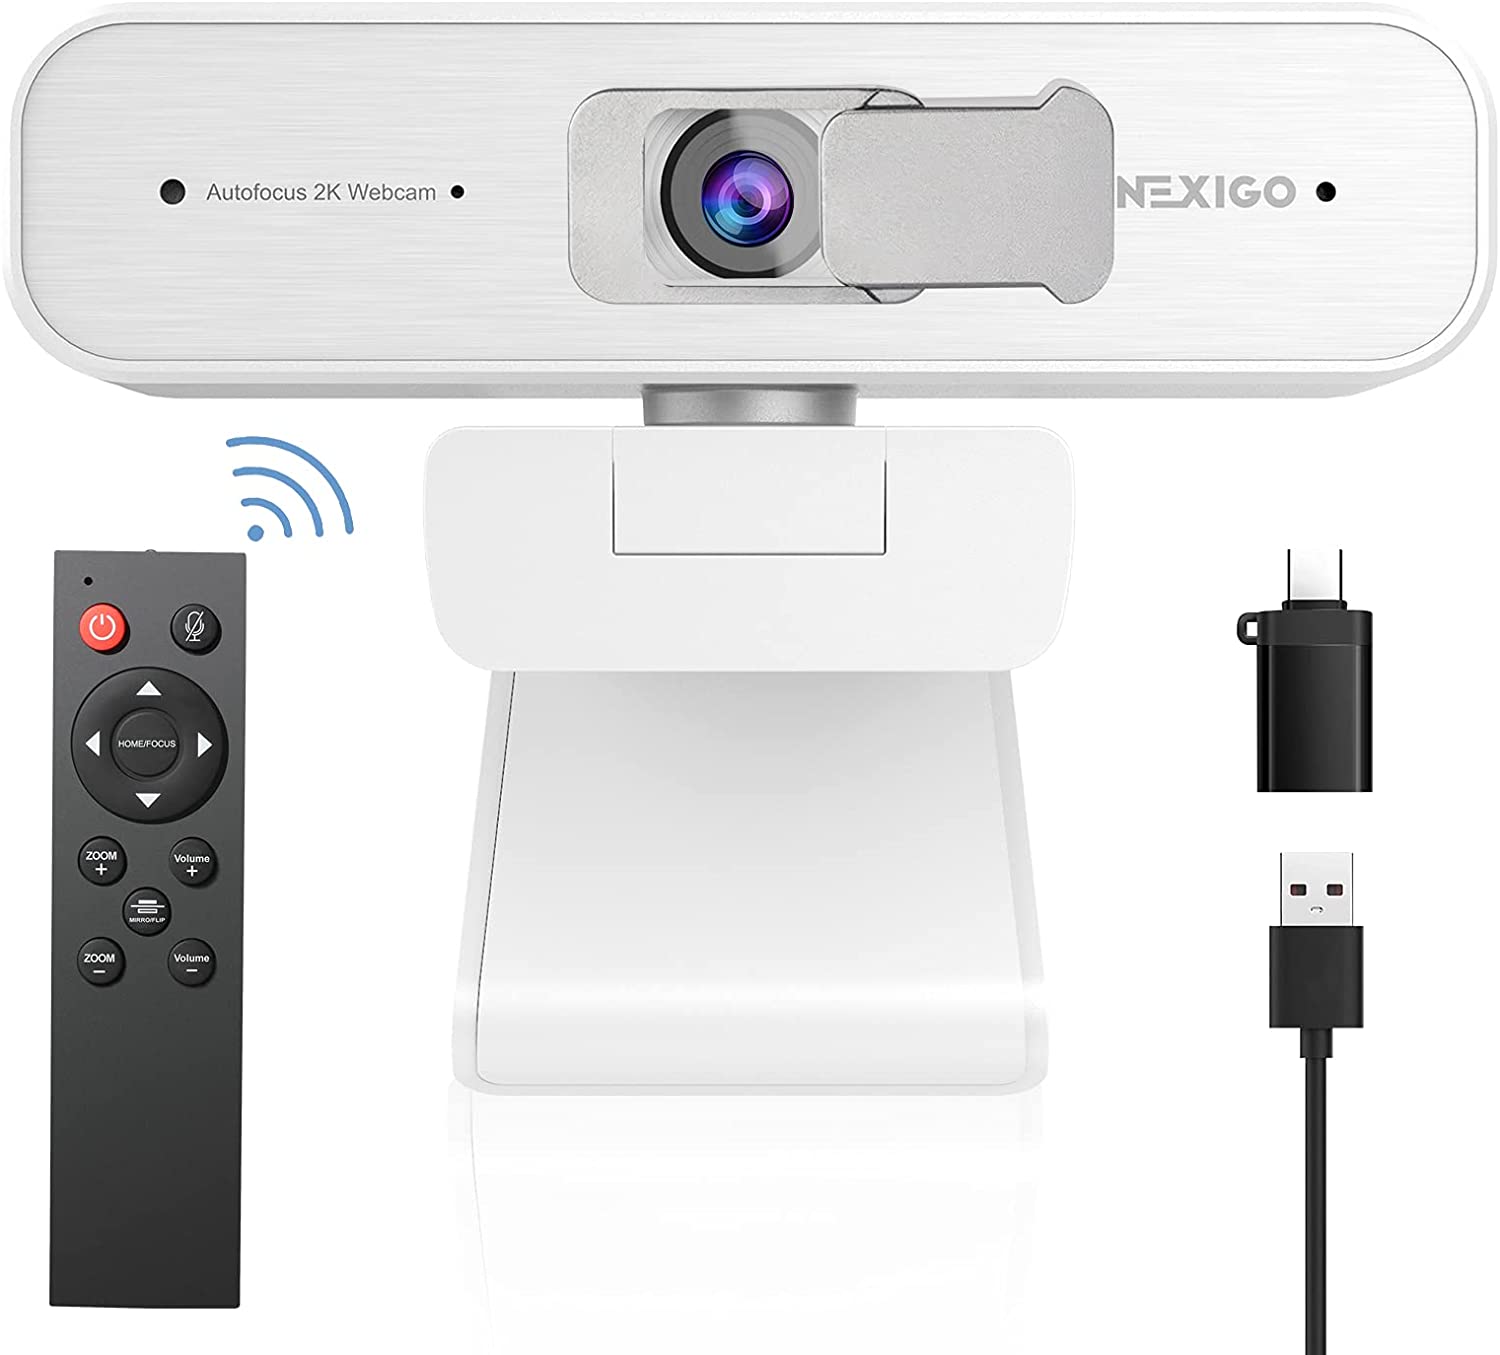 The white NexiGo N940P can be operated with a remote control and comes with a C to A adapter.